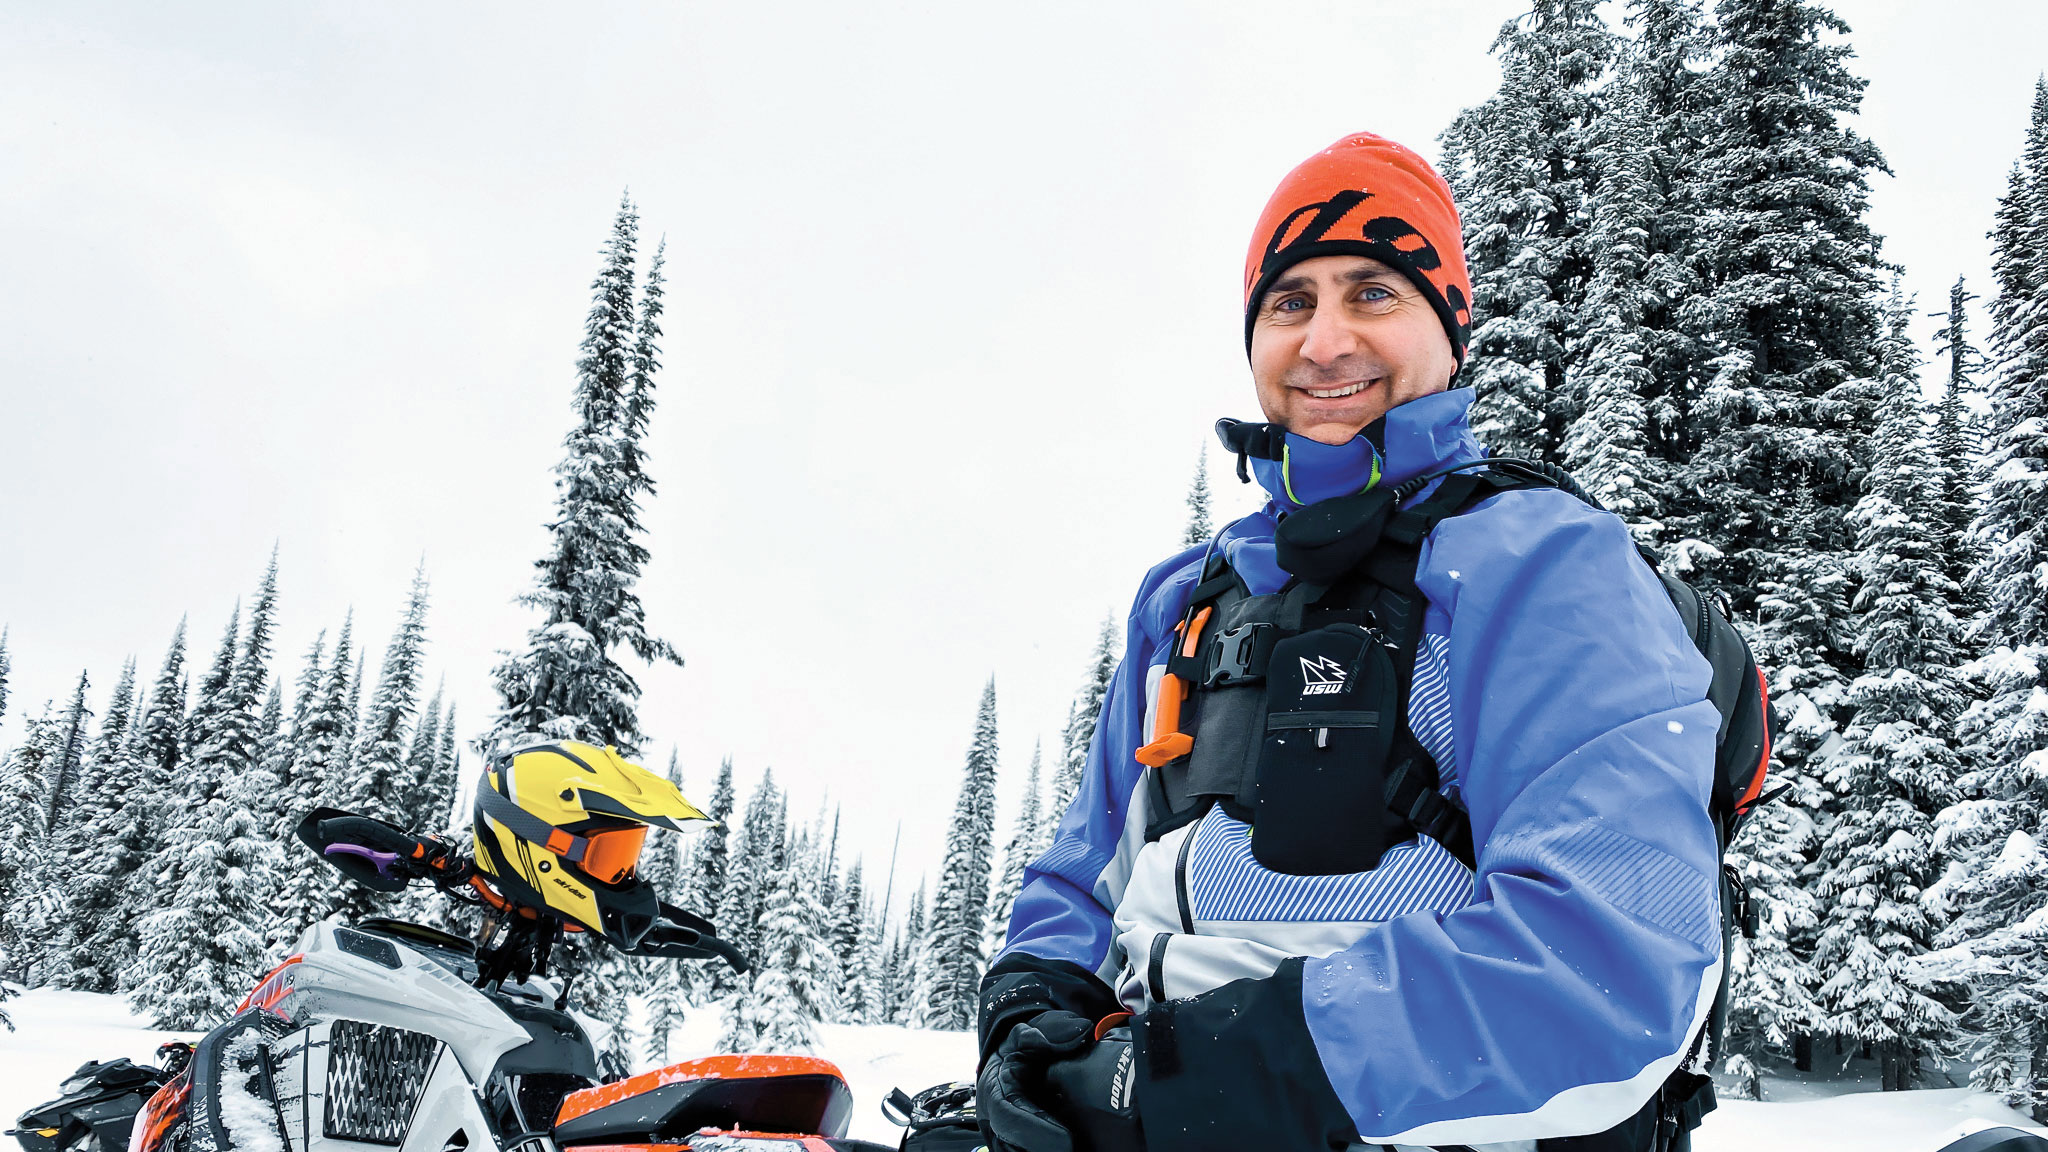 Dave Norona's First Ride with Ski-Doo